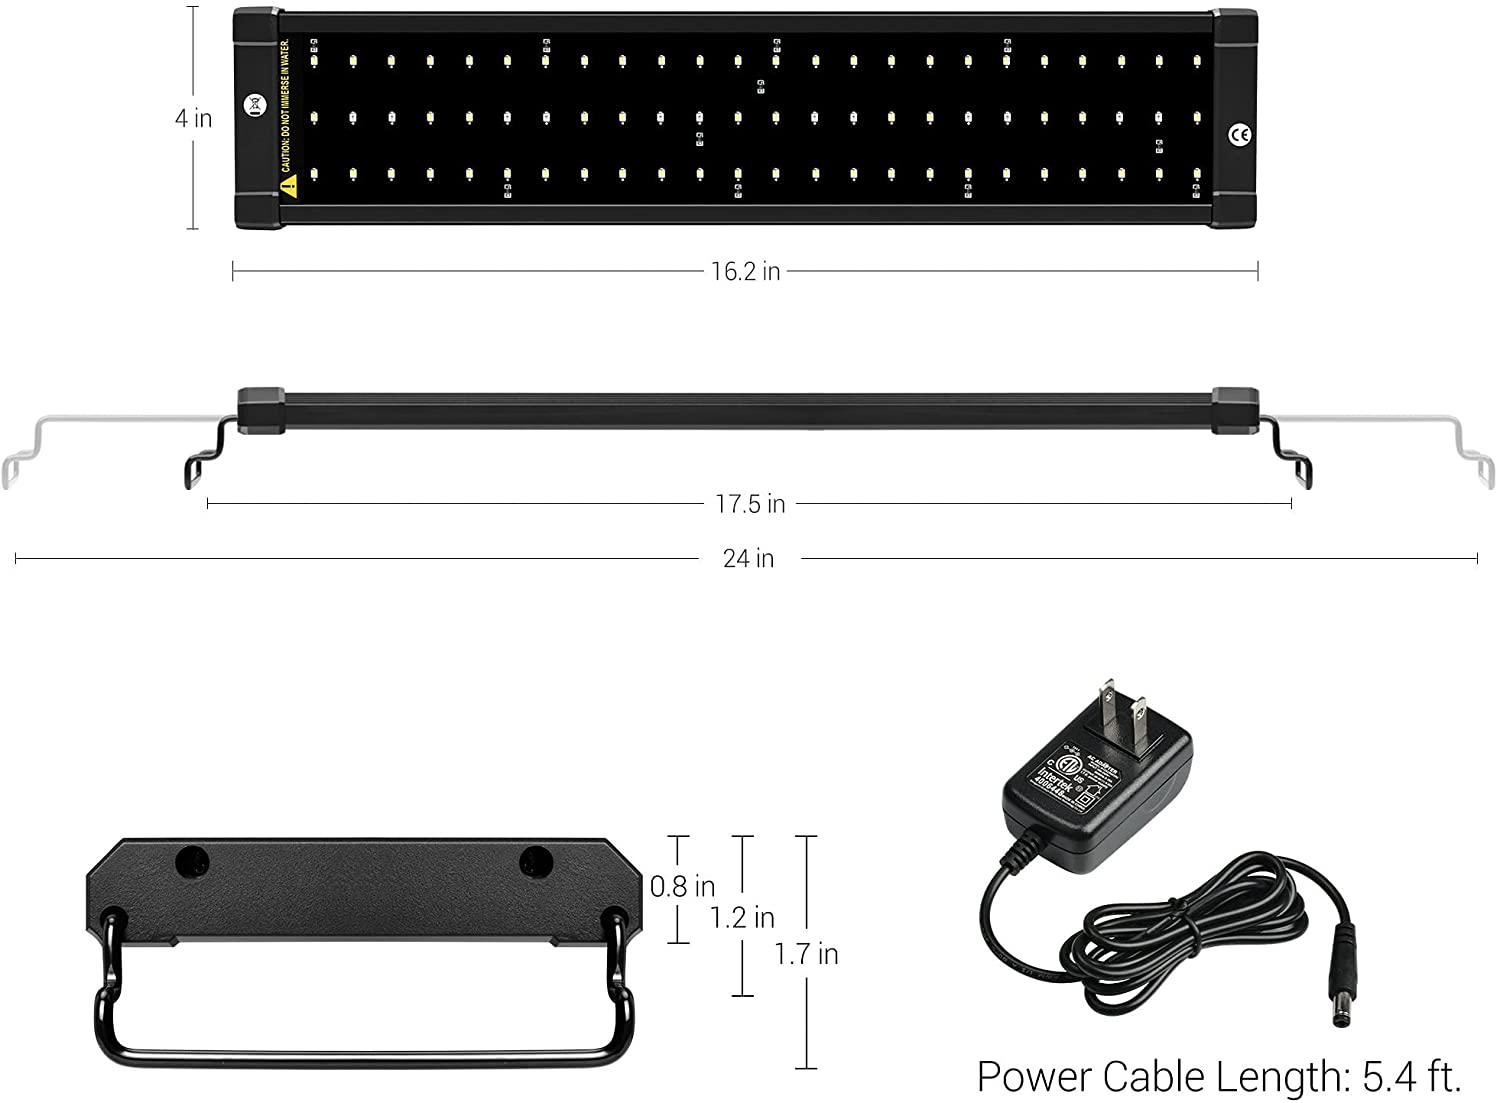 NICREW Classicled Aquarium Light, Fish Tank Light with Extendable Brackets, White and Blue Leds